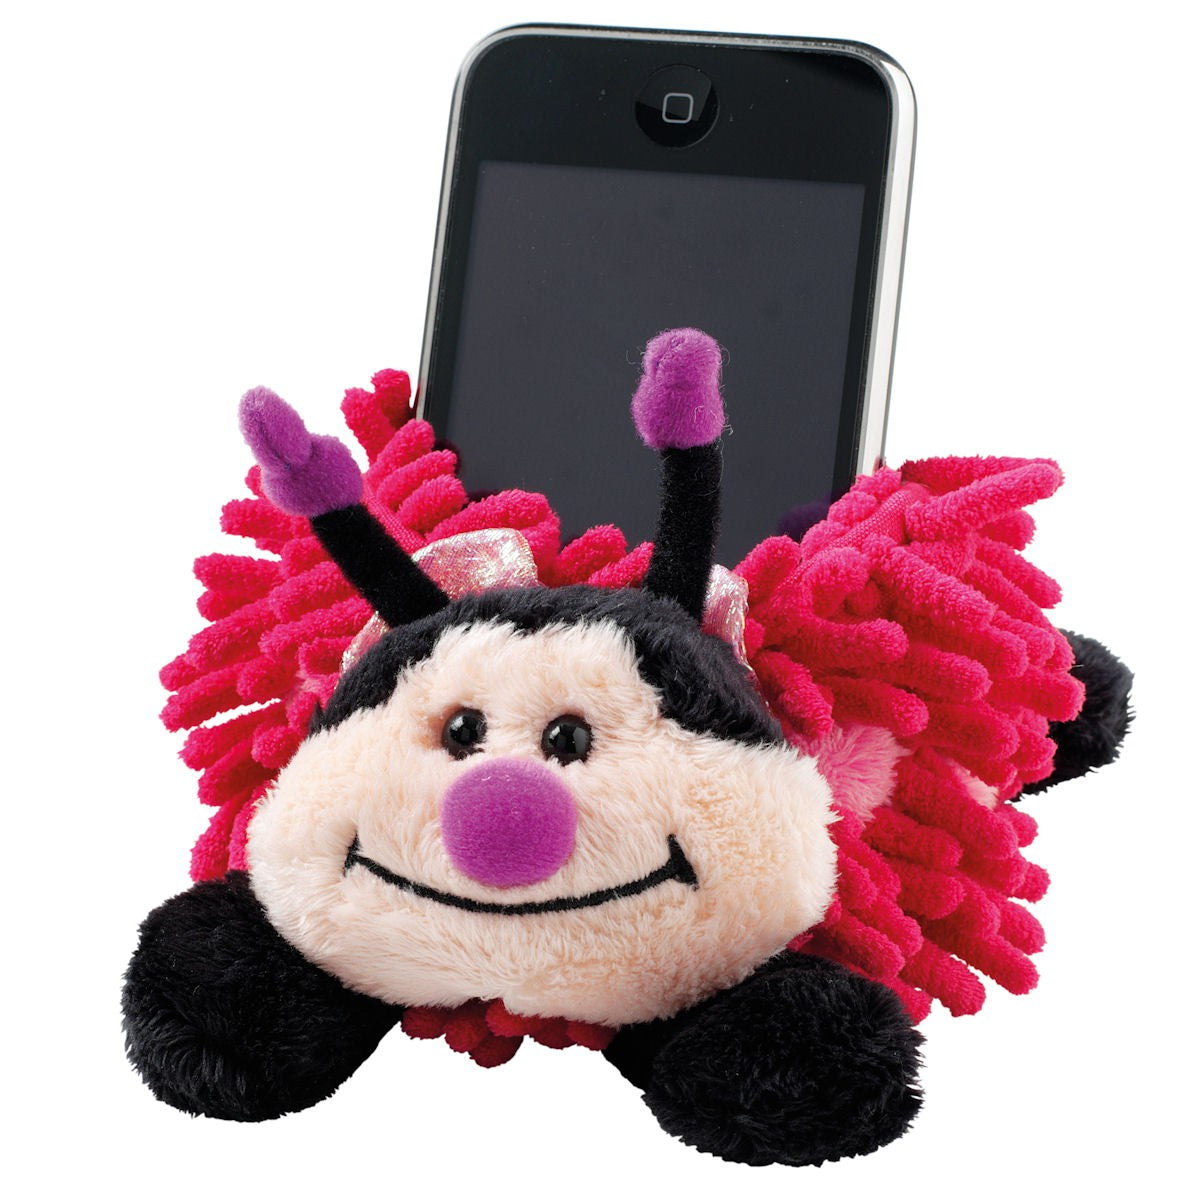 Aroma Home Mobile Phone Holder - Butterfly Purple Bug